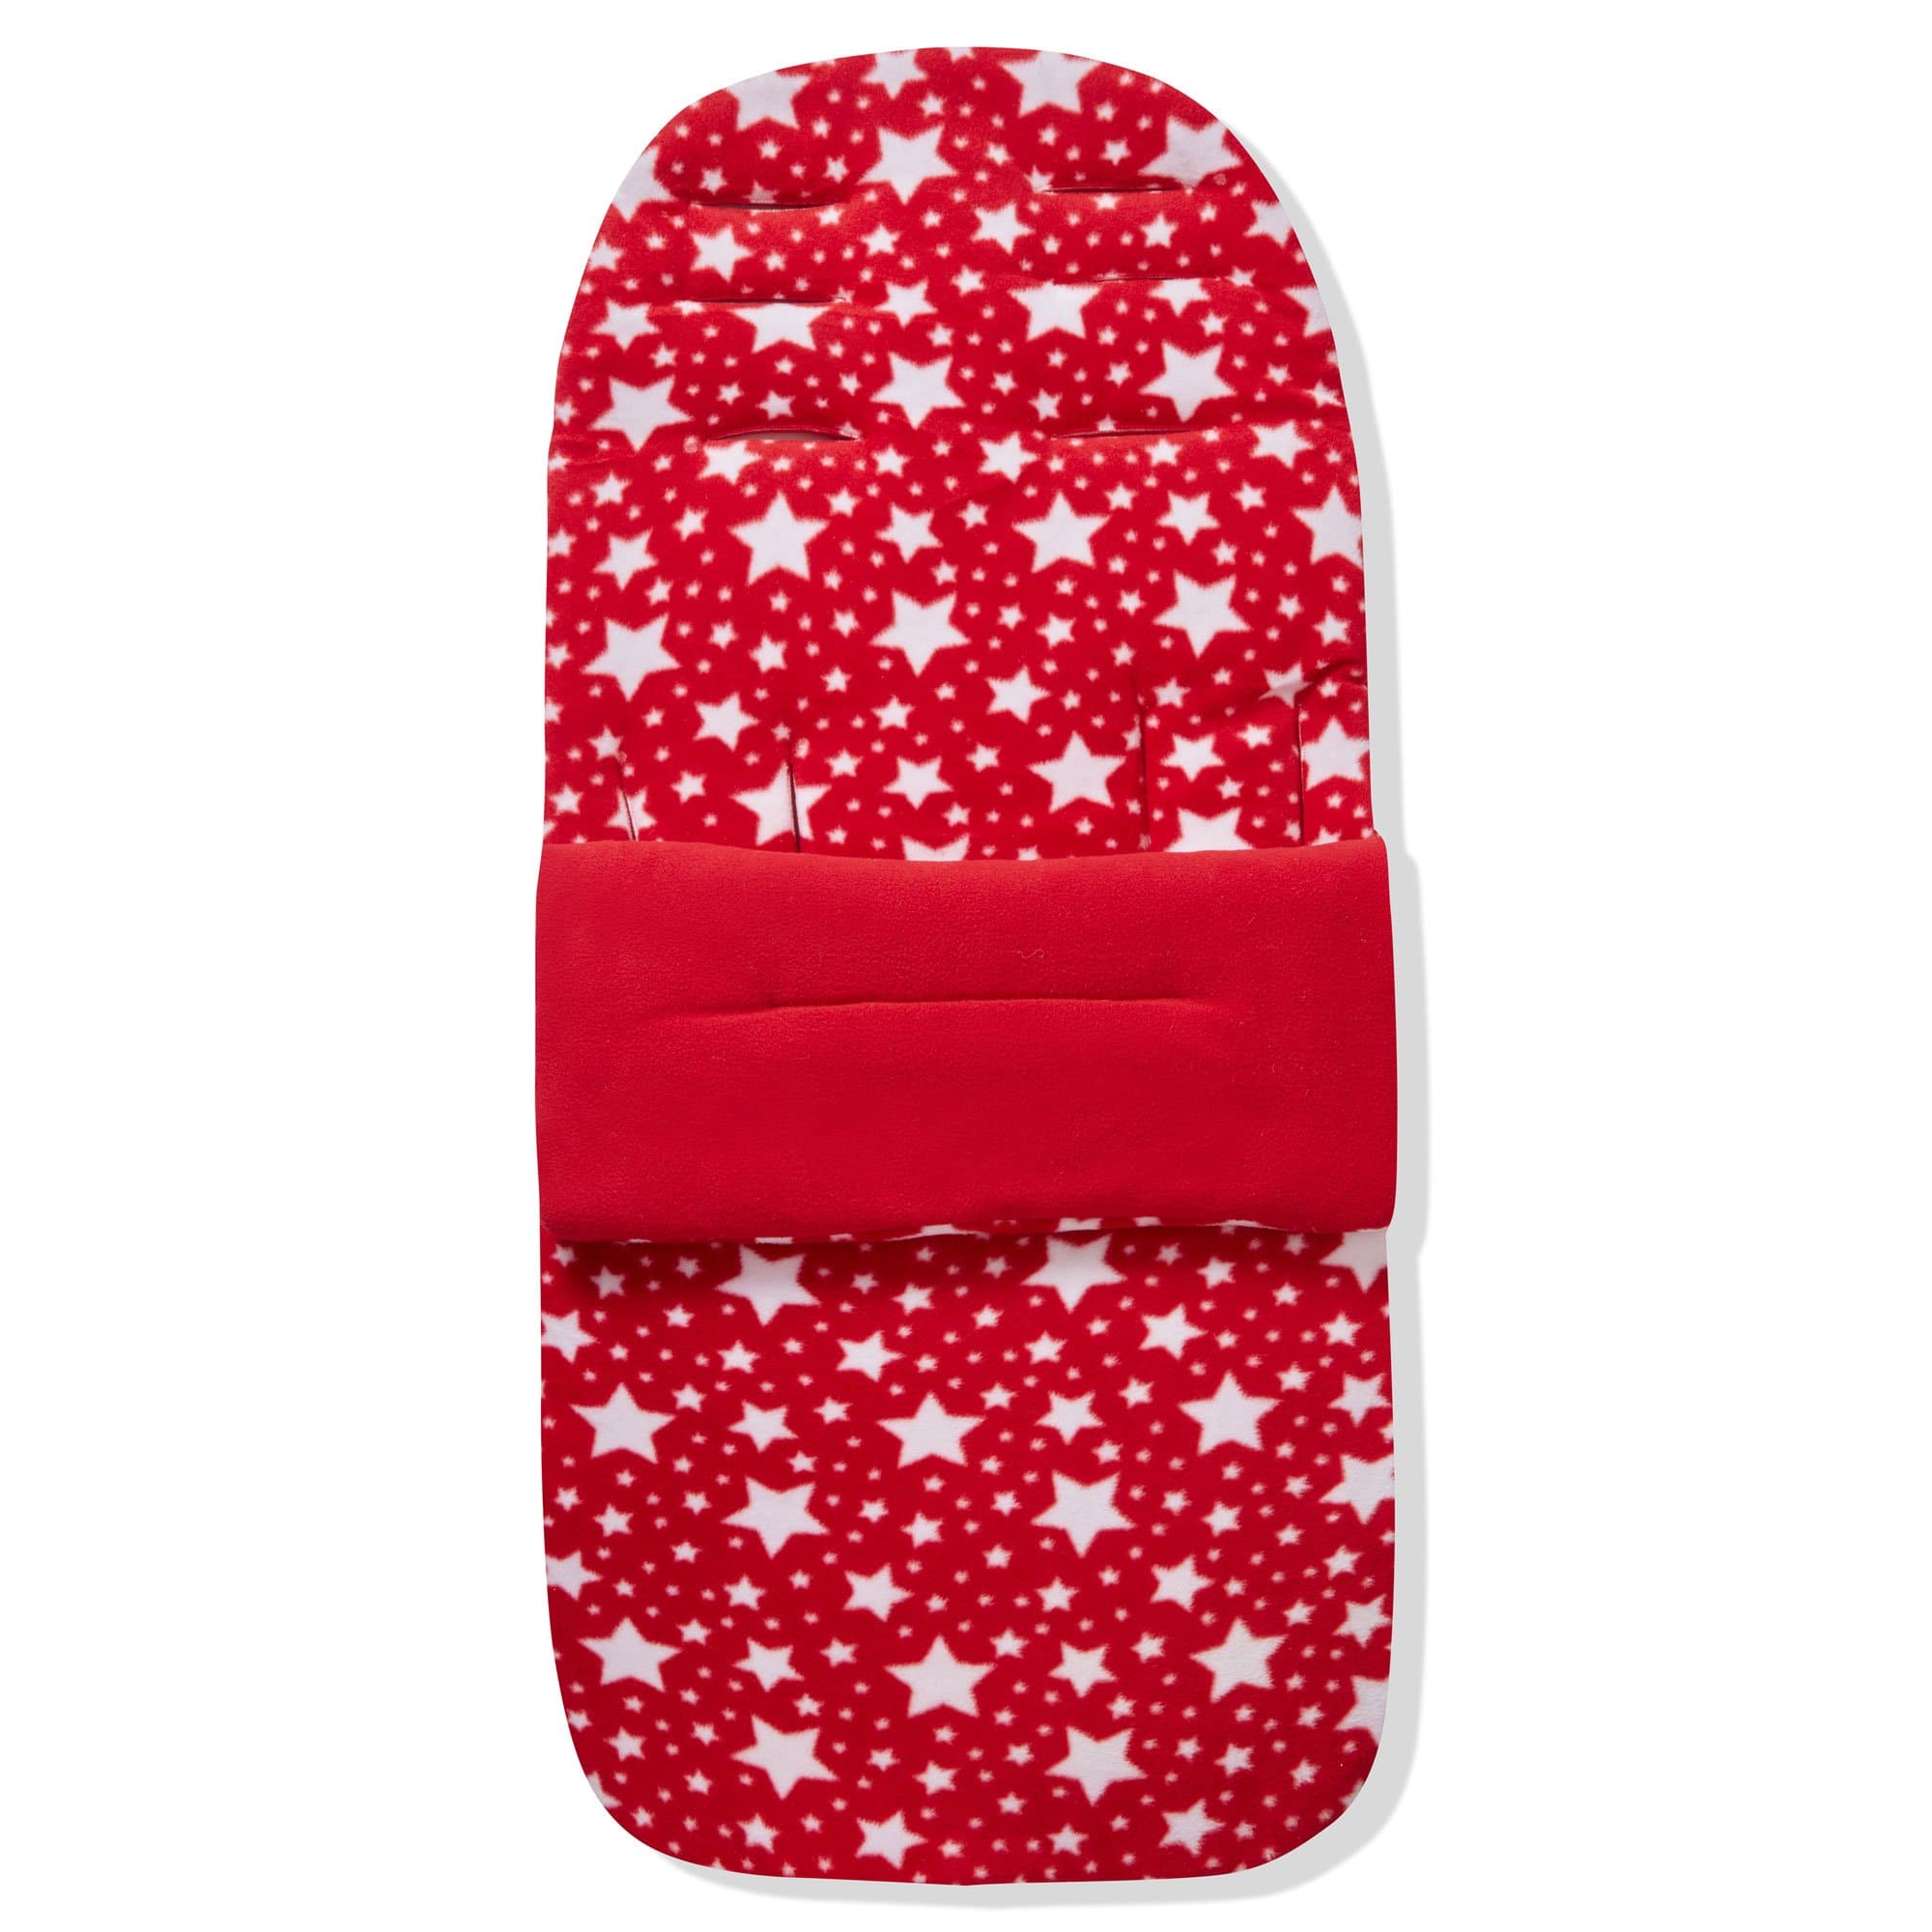 Fleece Footmuff / Cosy Toes Compatible with Mee-Go - For Your Little One